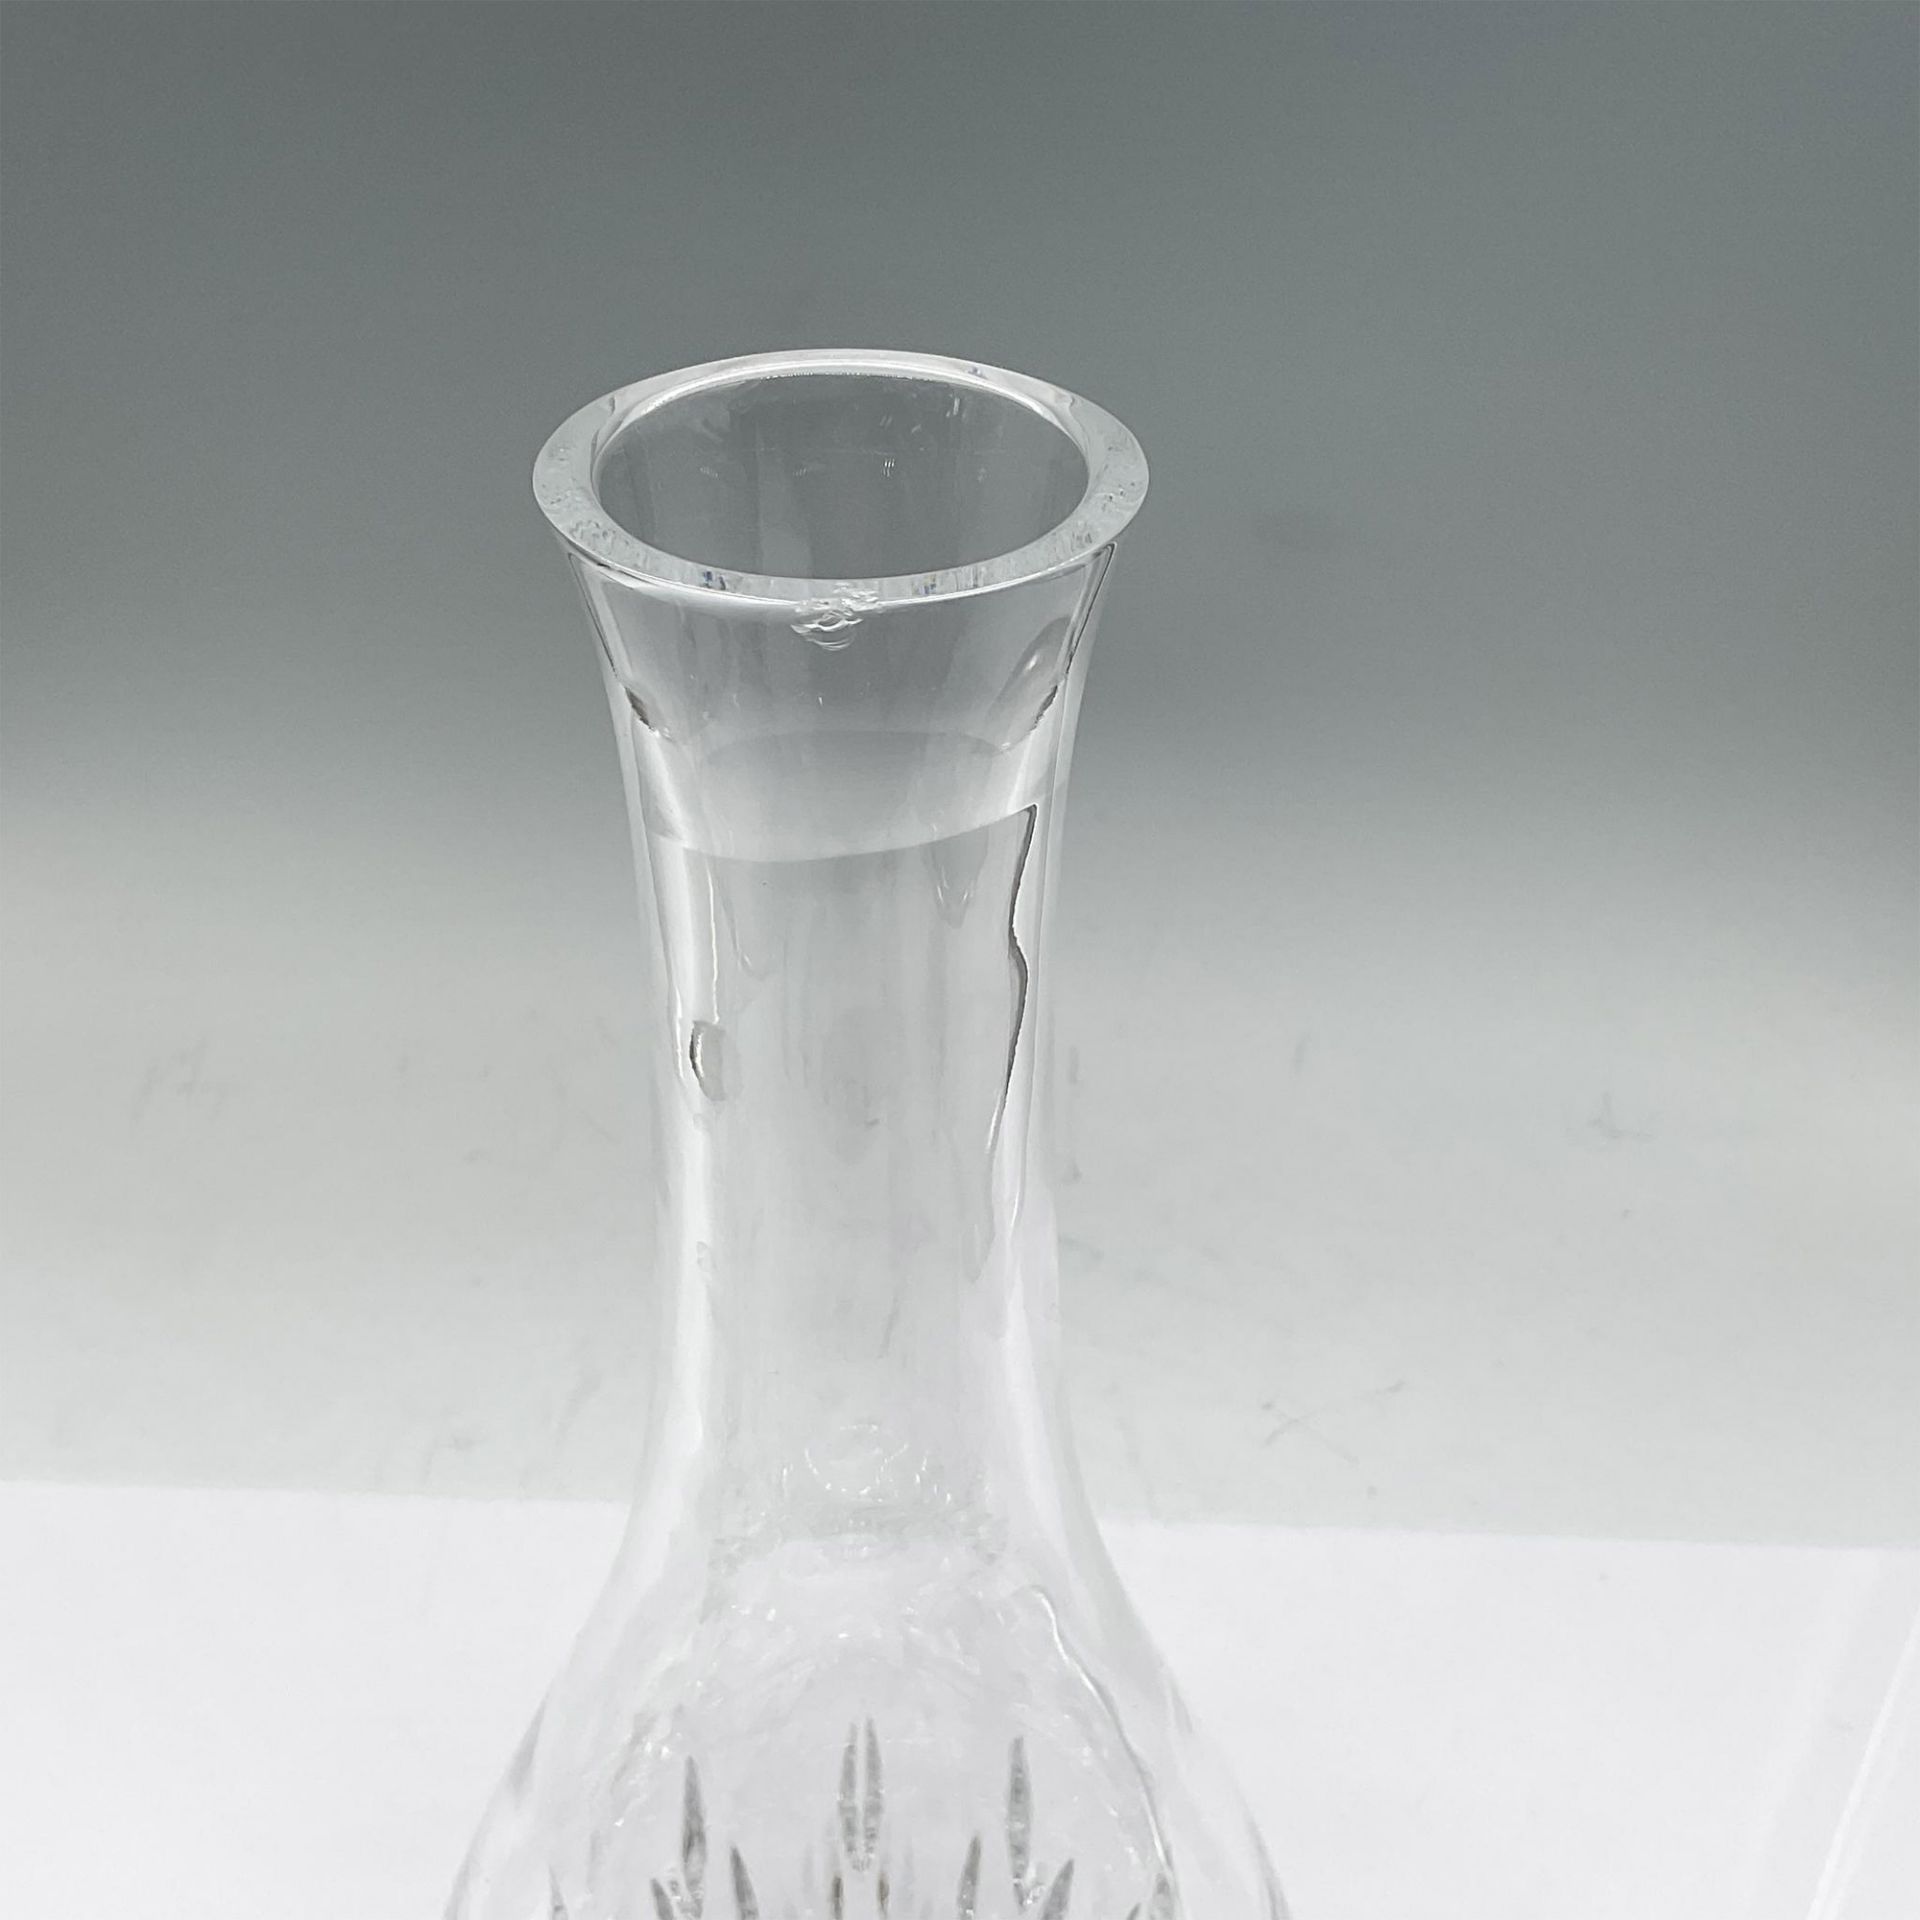 Vera Wang for Wedgwood Crystal Decanter with Stopper - Image 3 of 4